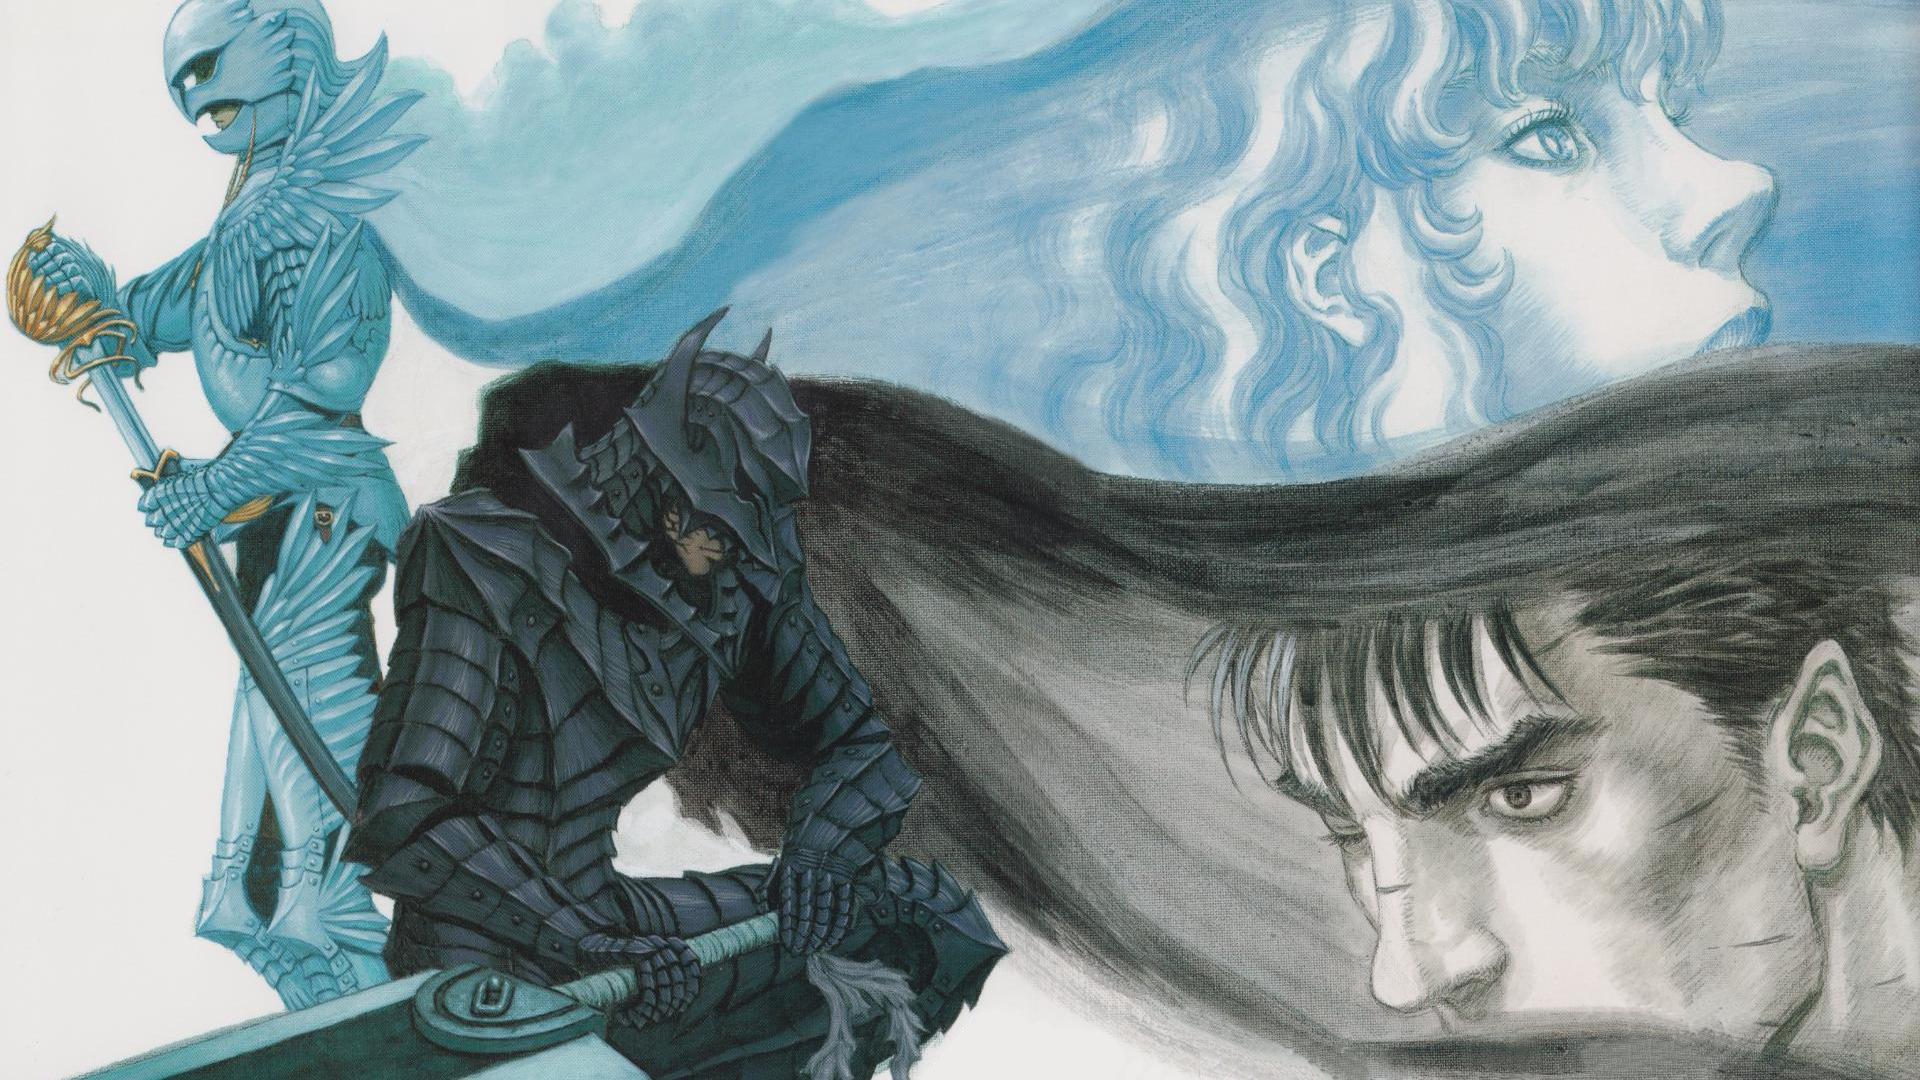 Guts And Griffith HD Wallpapers.